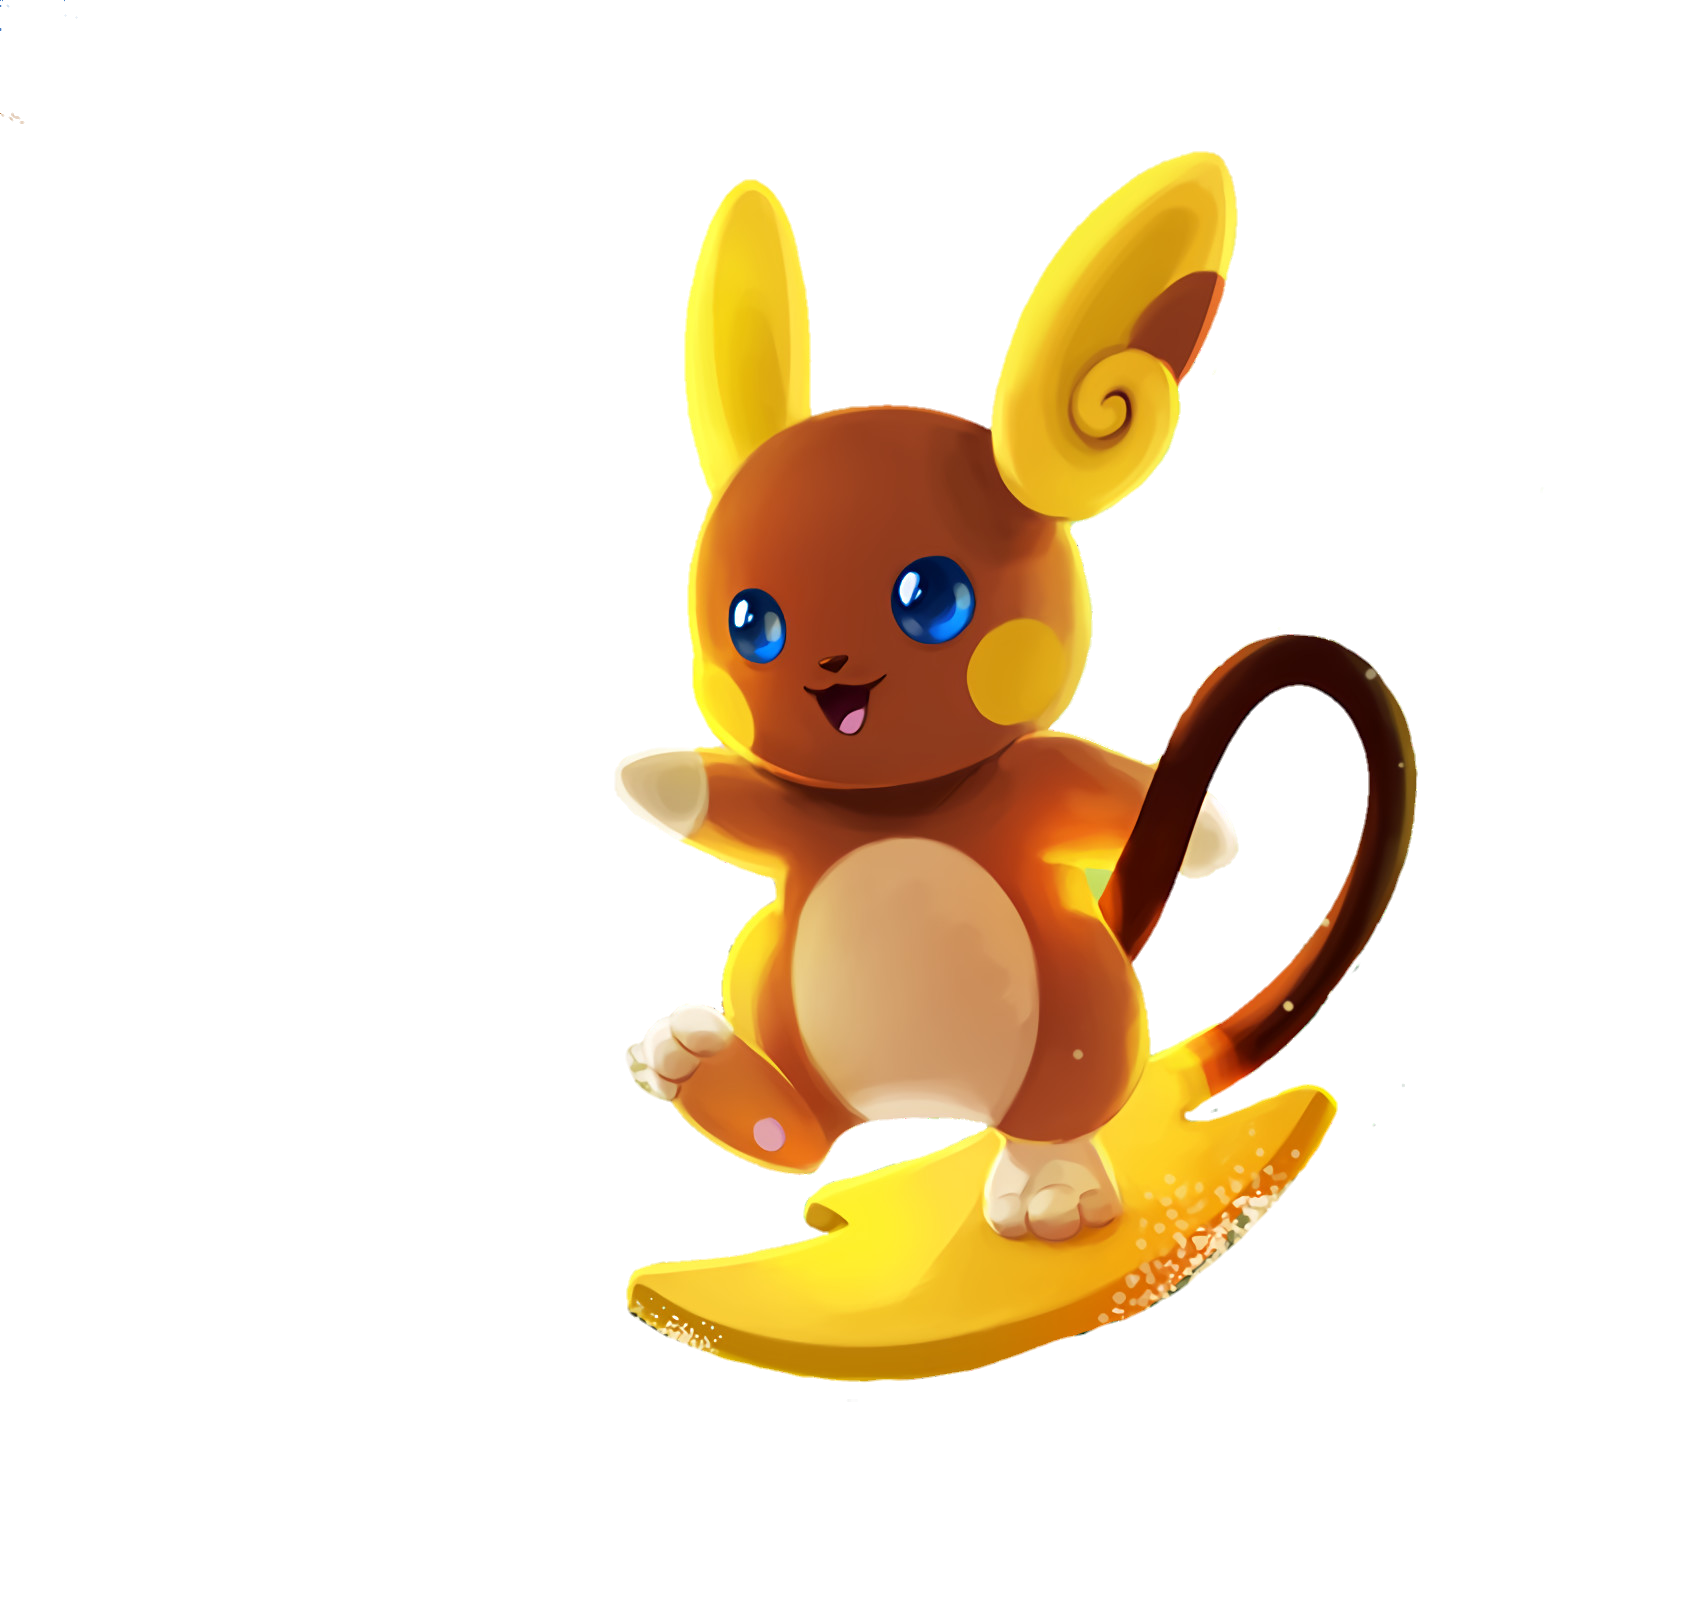 pokemon-png-from-pngfre-40